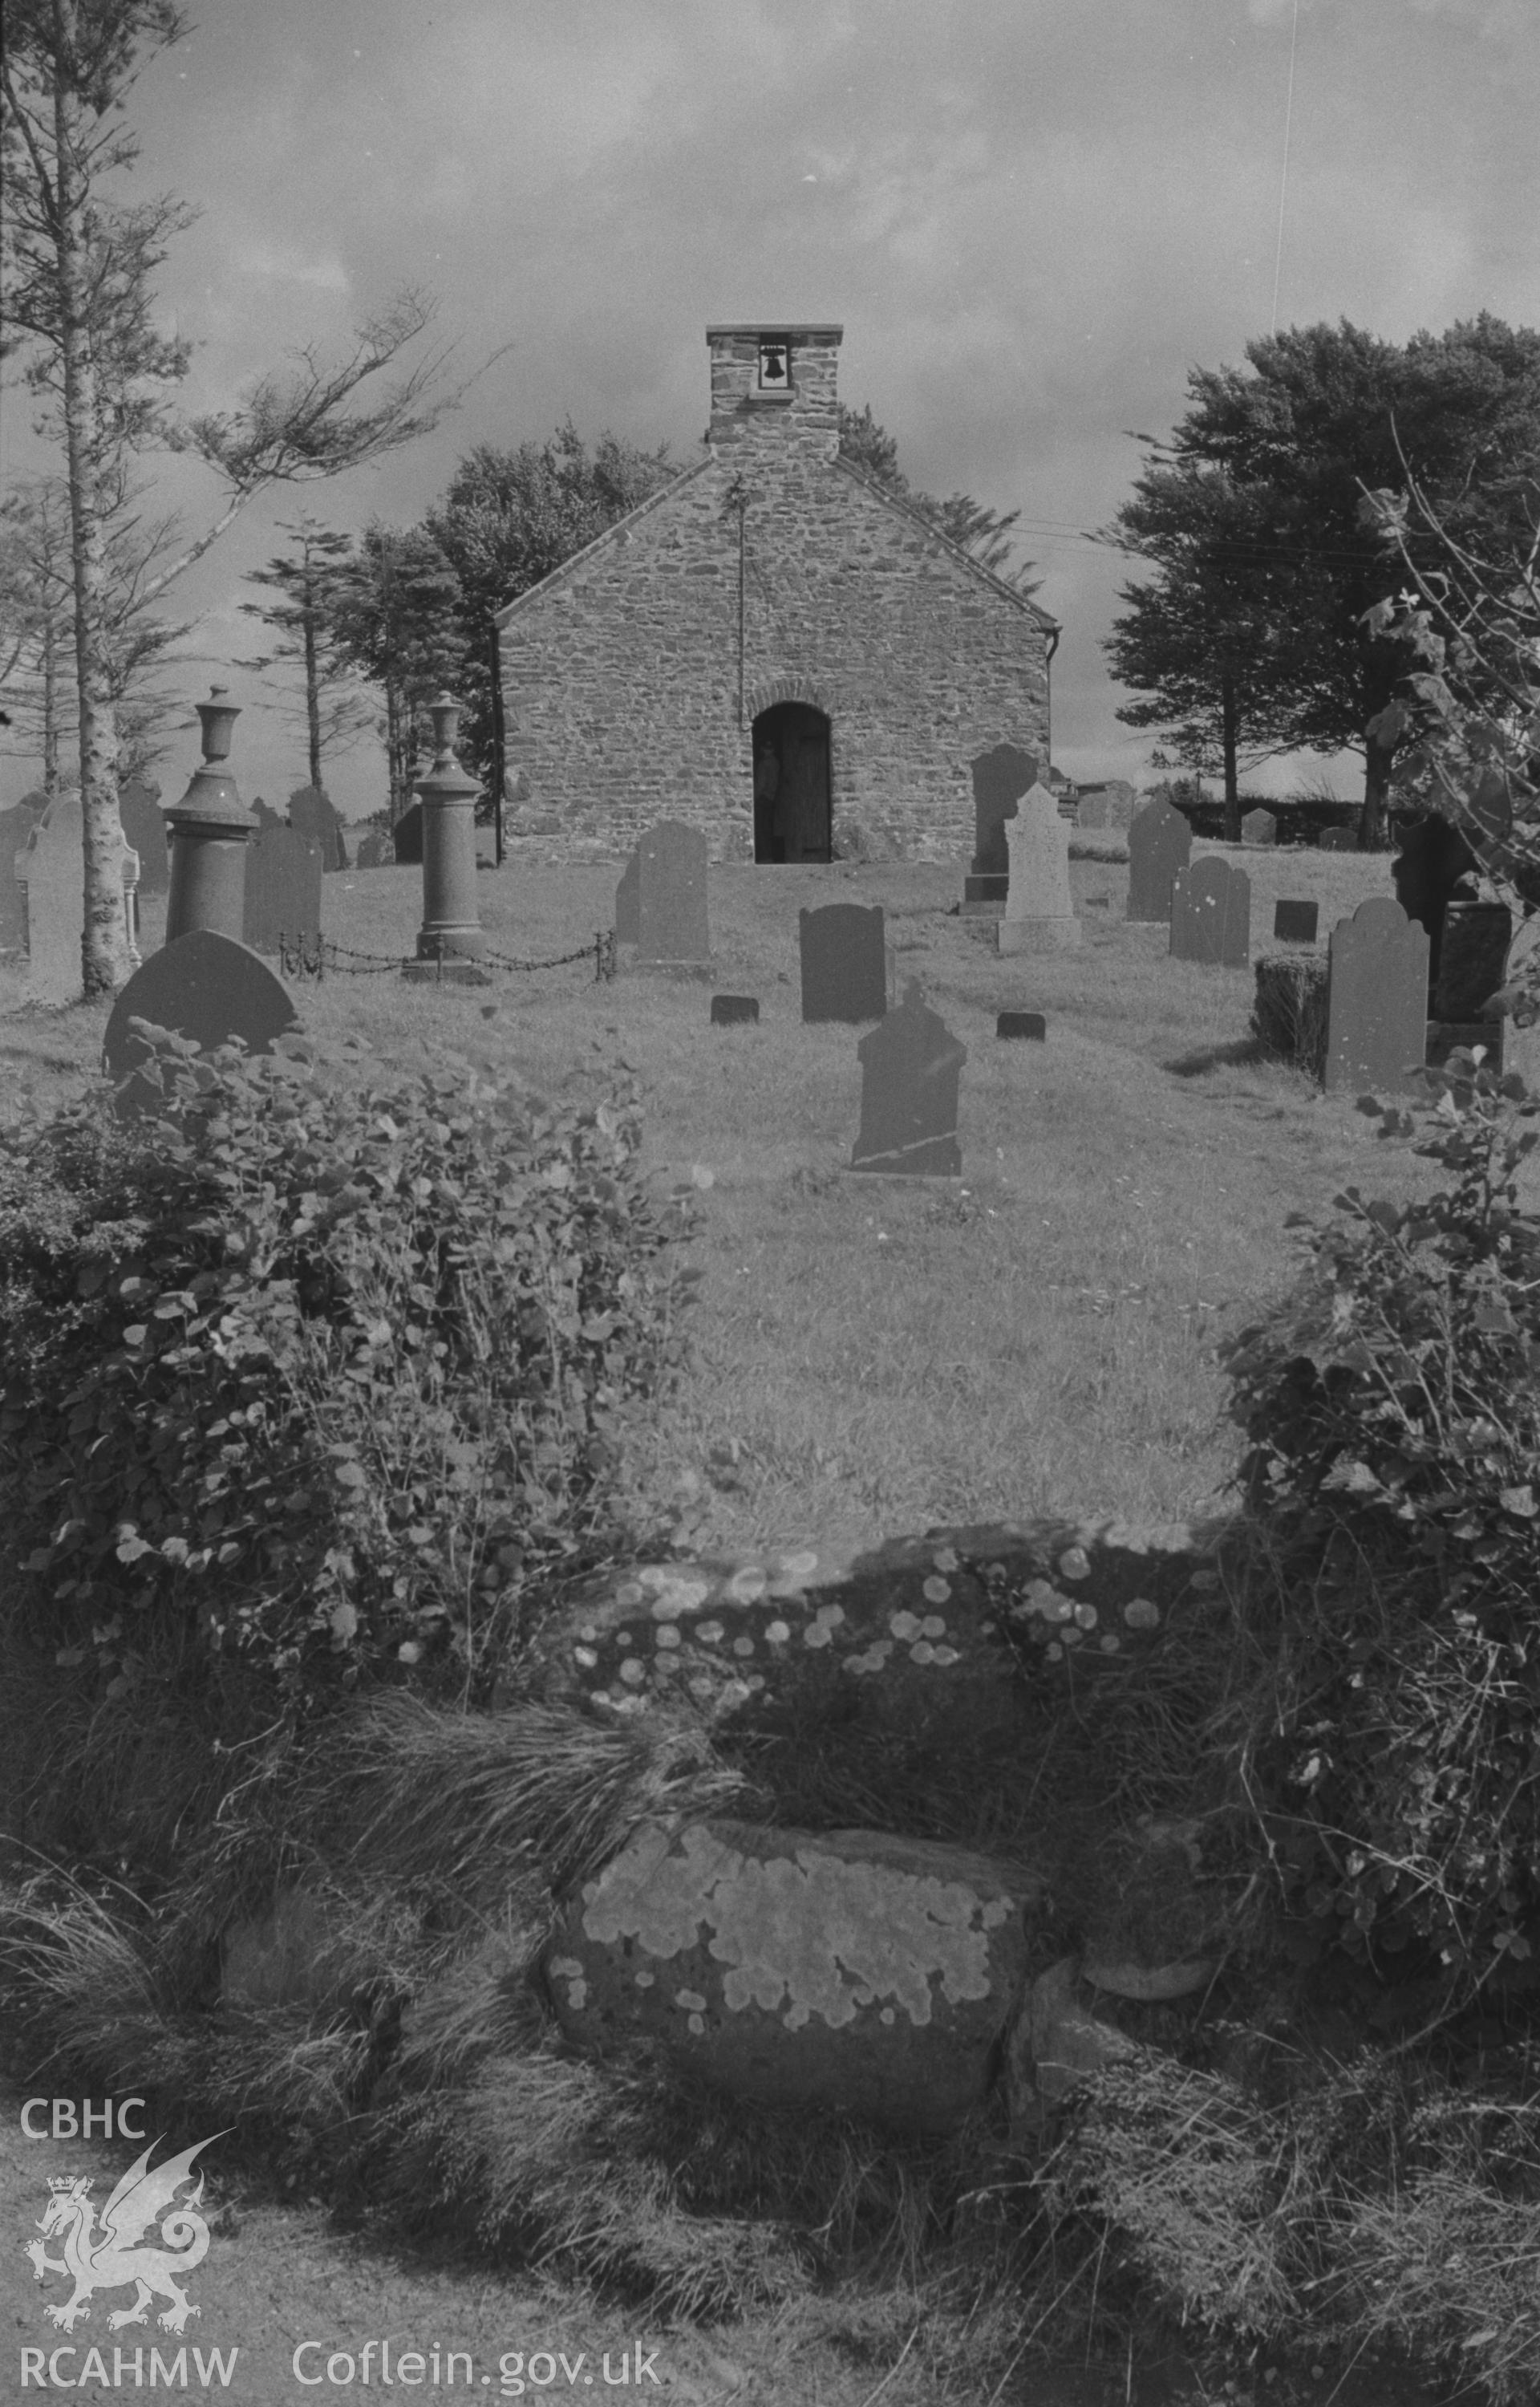 Digital copy of black & white negative showing view of St. Padarn's Church, Llanbadarn Odwyn, looking across the stile, from the lane, into the churchyard. Photographed by Arthur O. Chater on 2nd September 1967 looking east from Grid Reference SN 634 605.